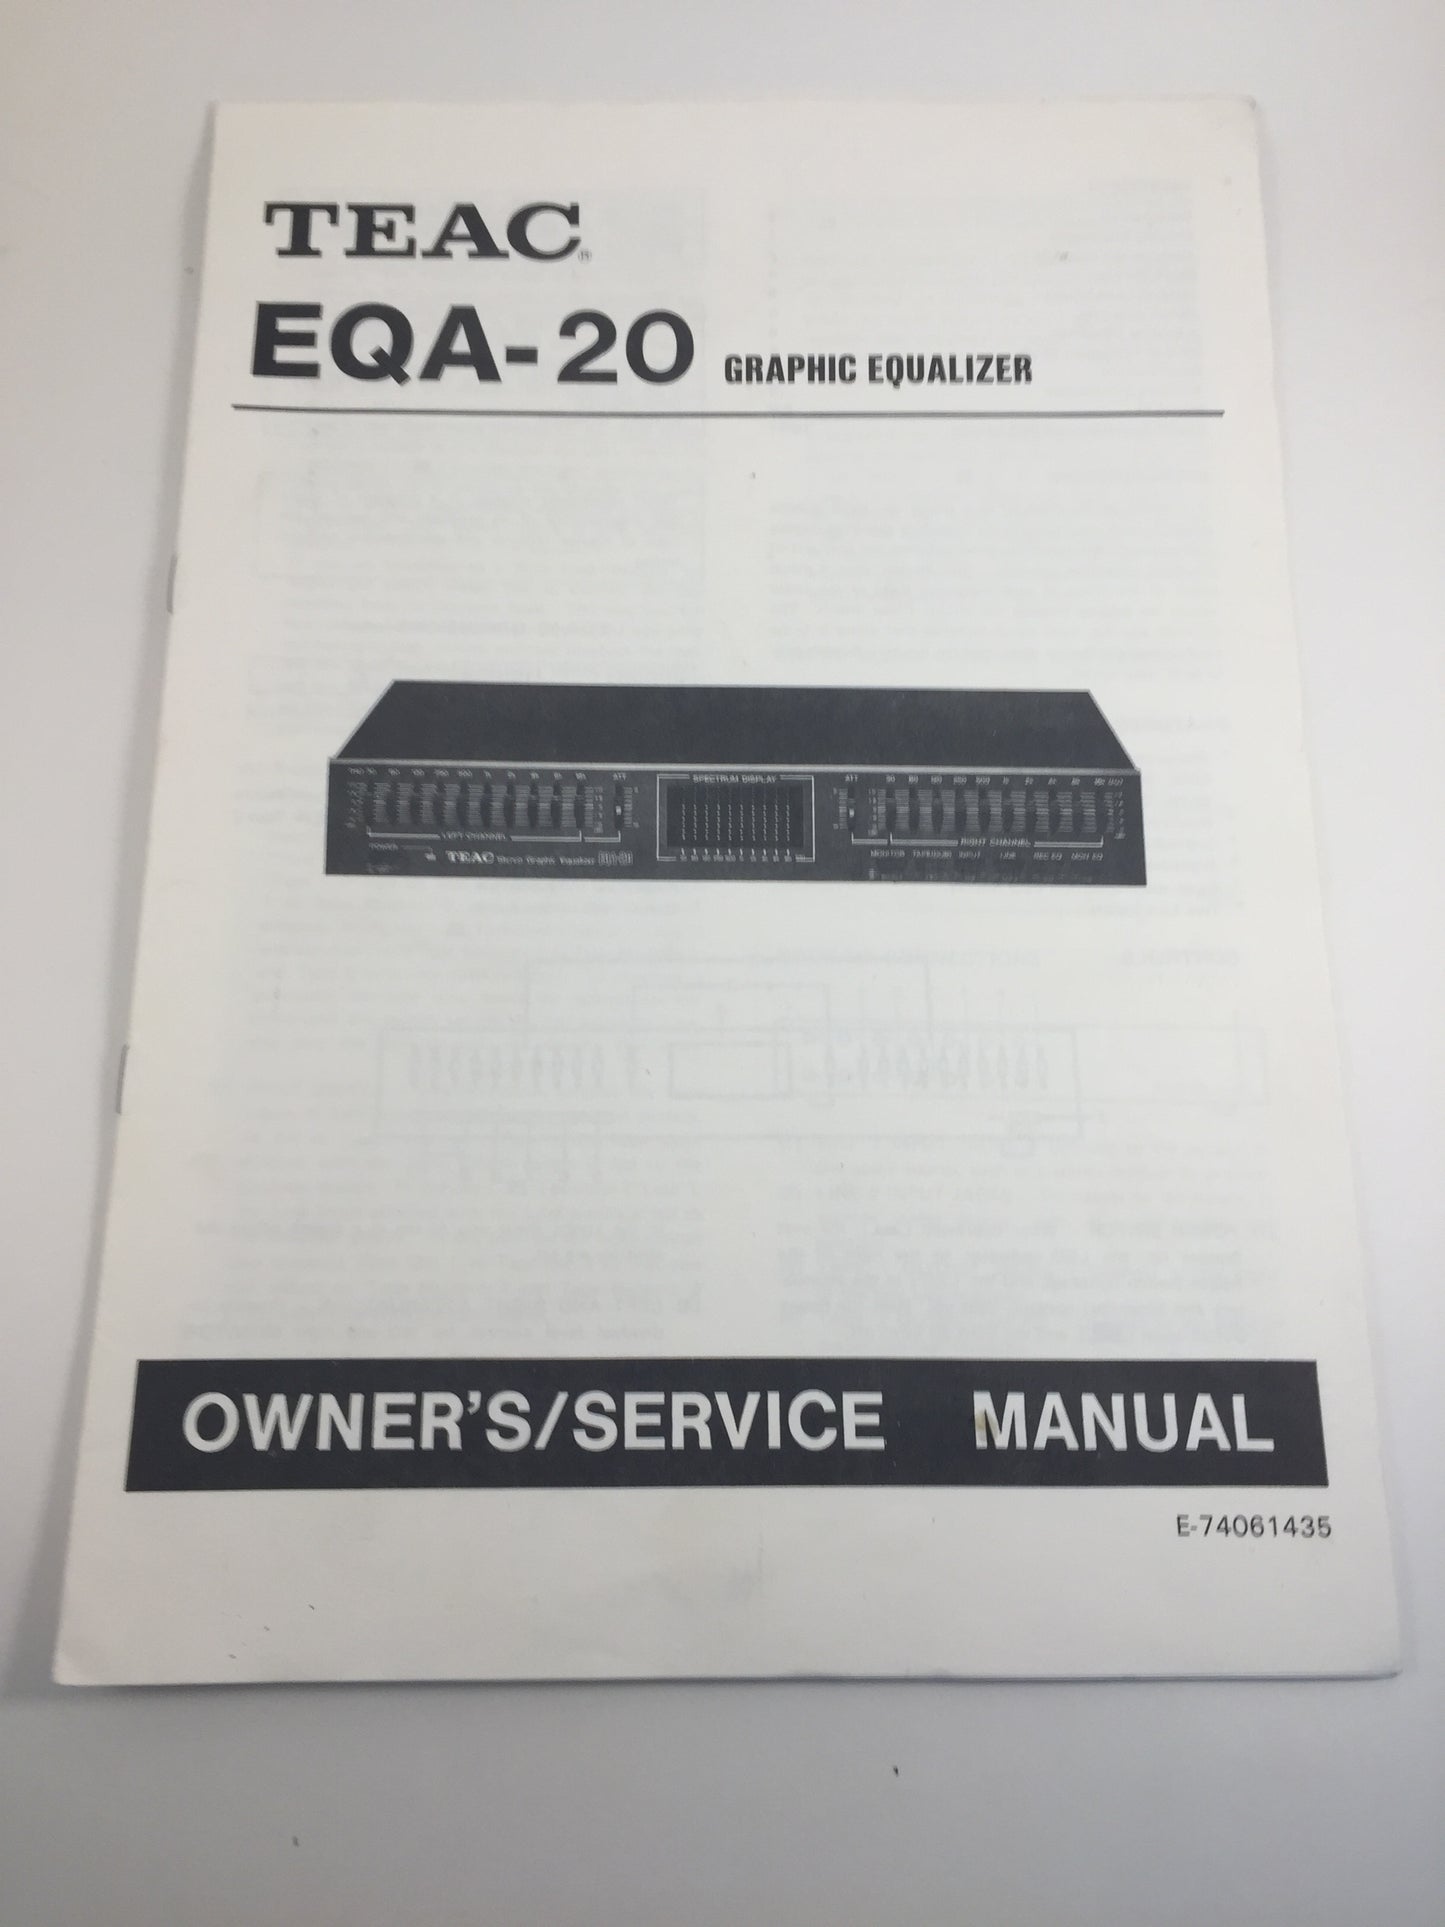 Teac EQA-20 Graphic Equalizer Owner's/Service Manual